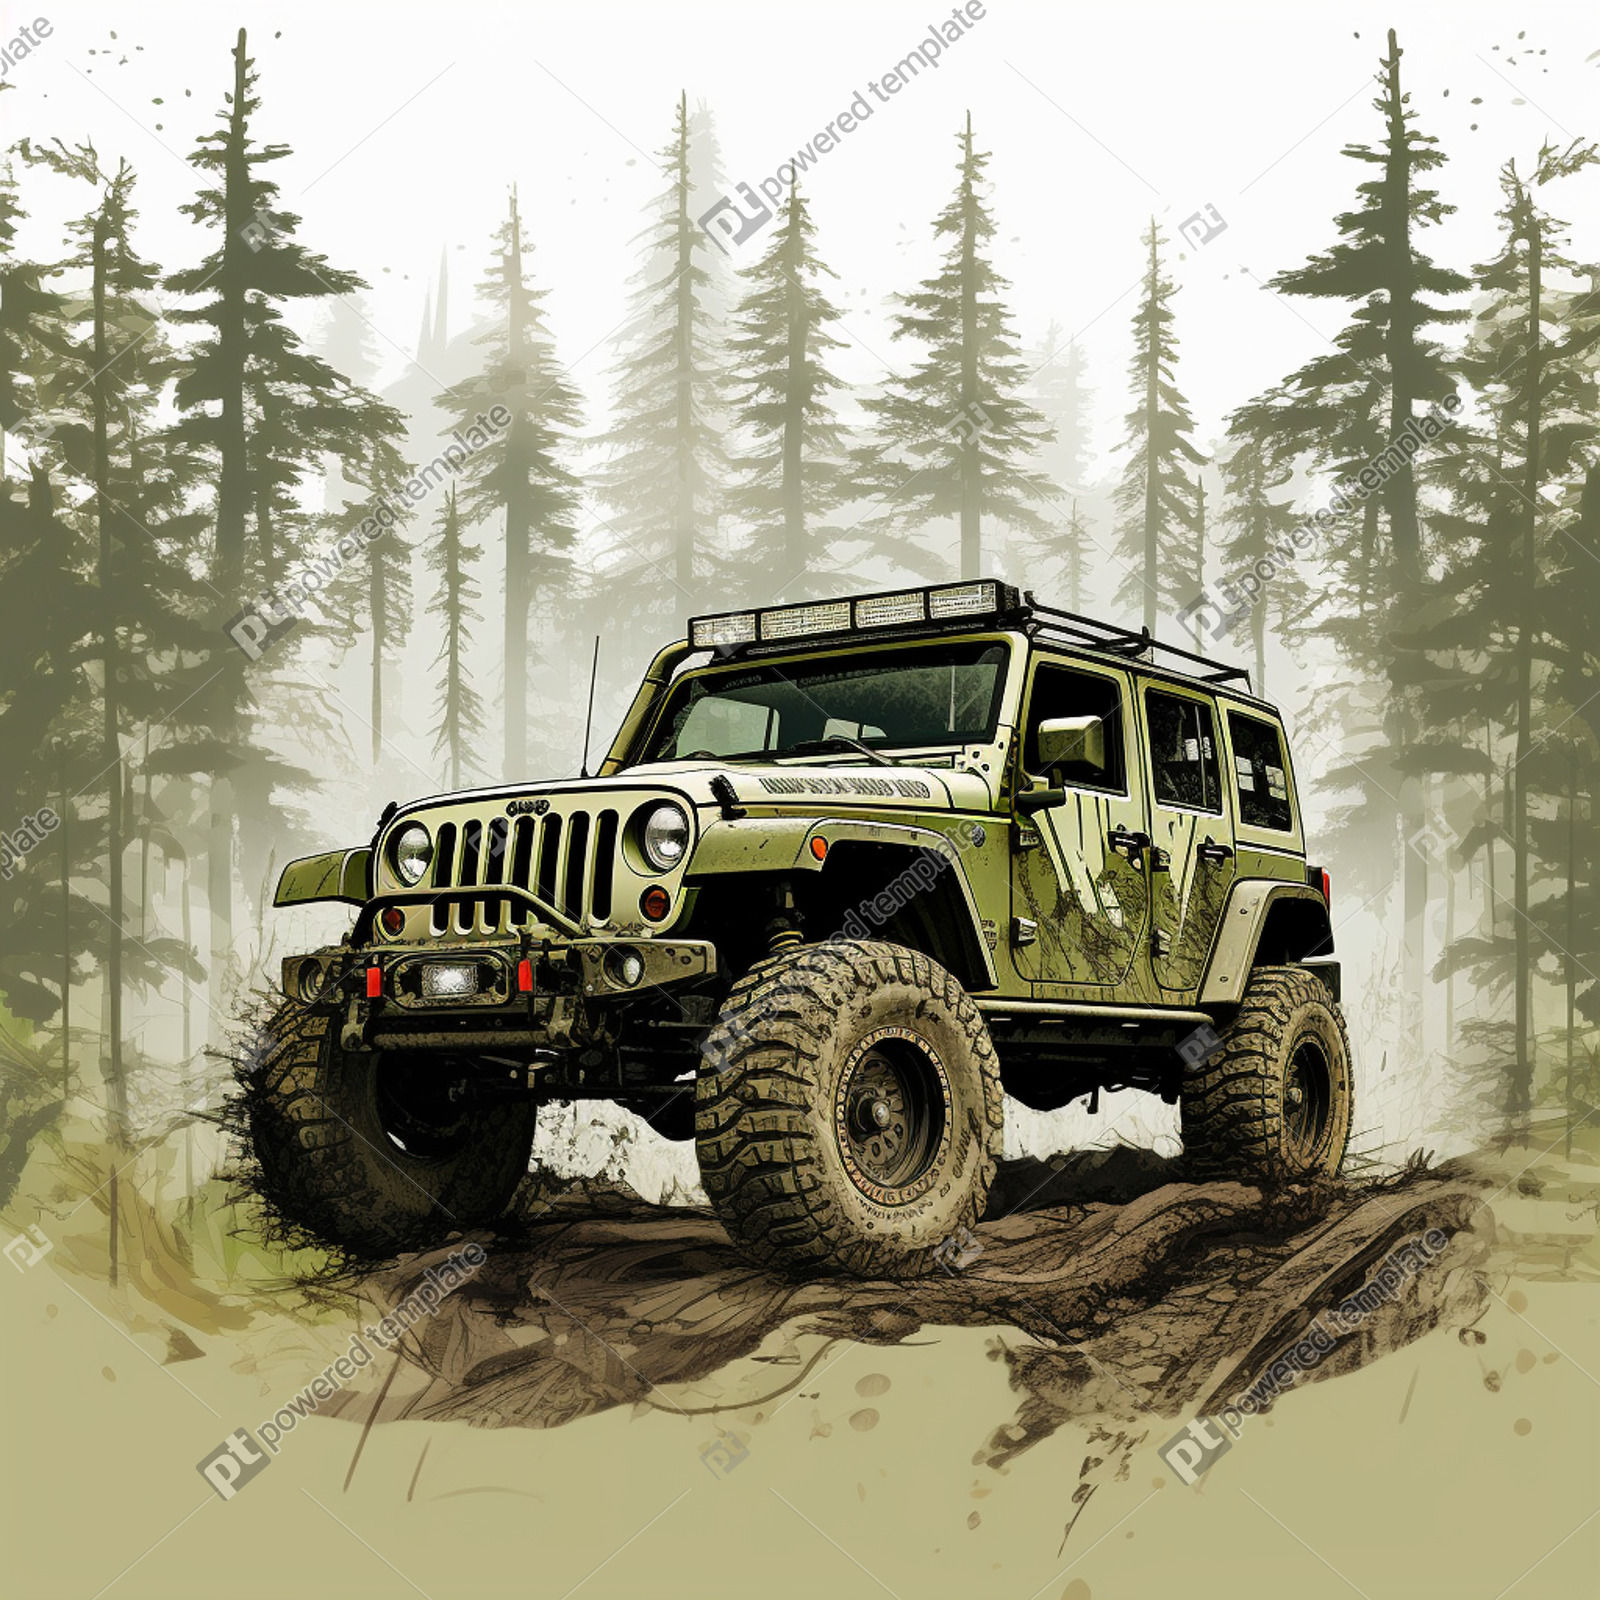 How to draw Jeep Wrangler Rubicon - Sketchok easy drawing guides